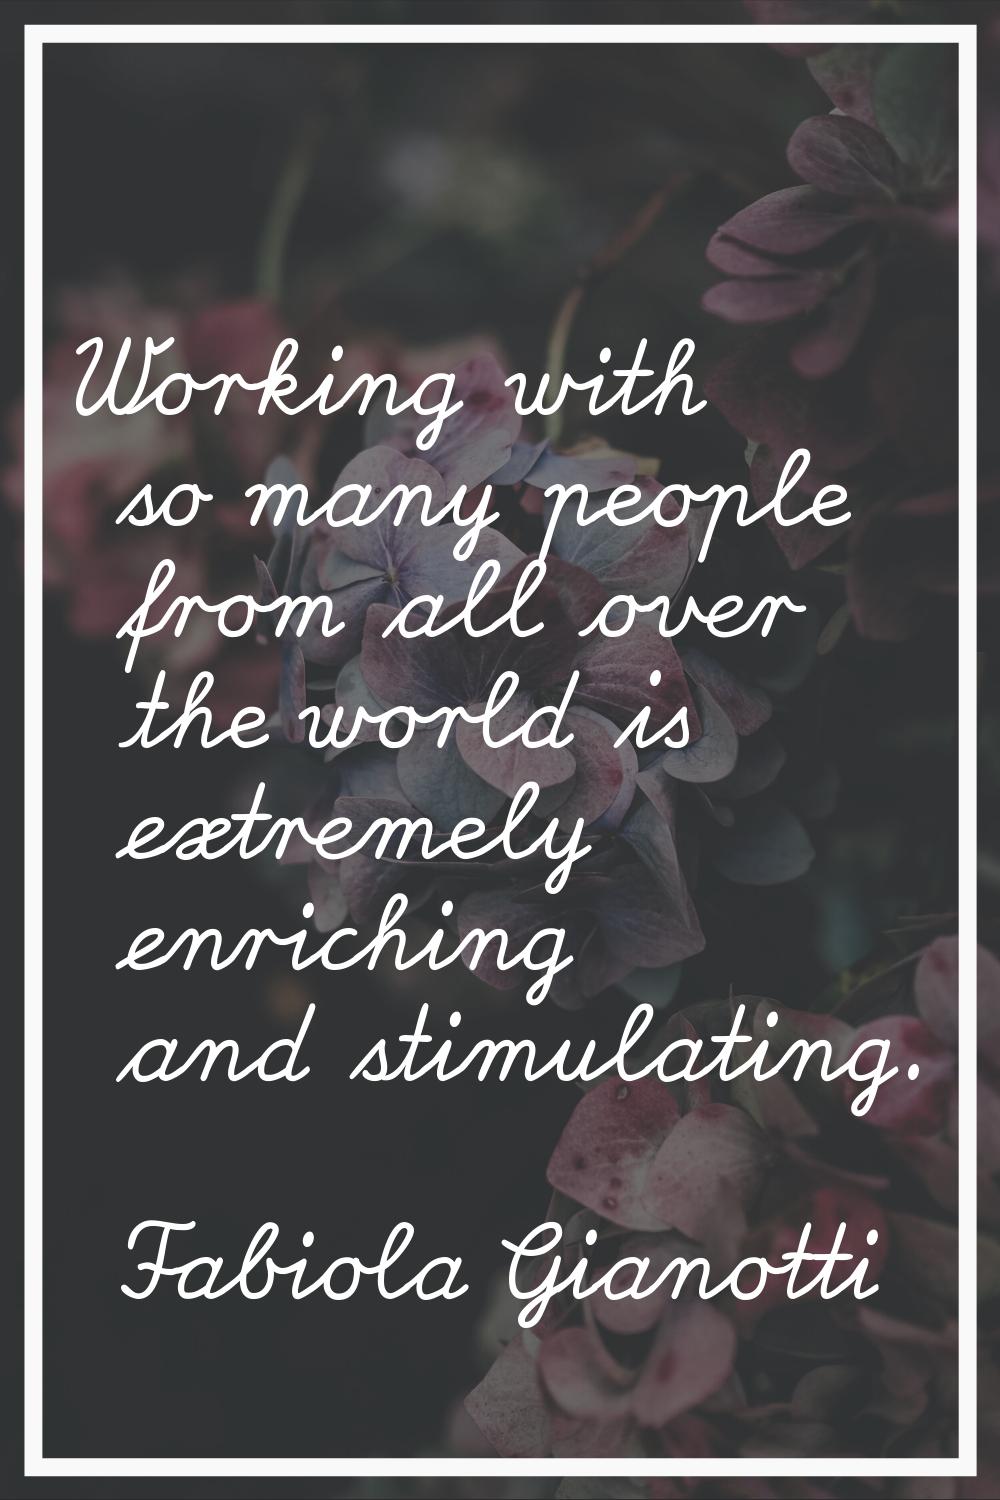 Working with so many people from all over the world is extremely enriching and stimulating.